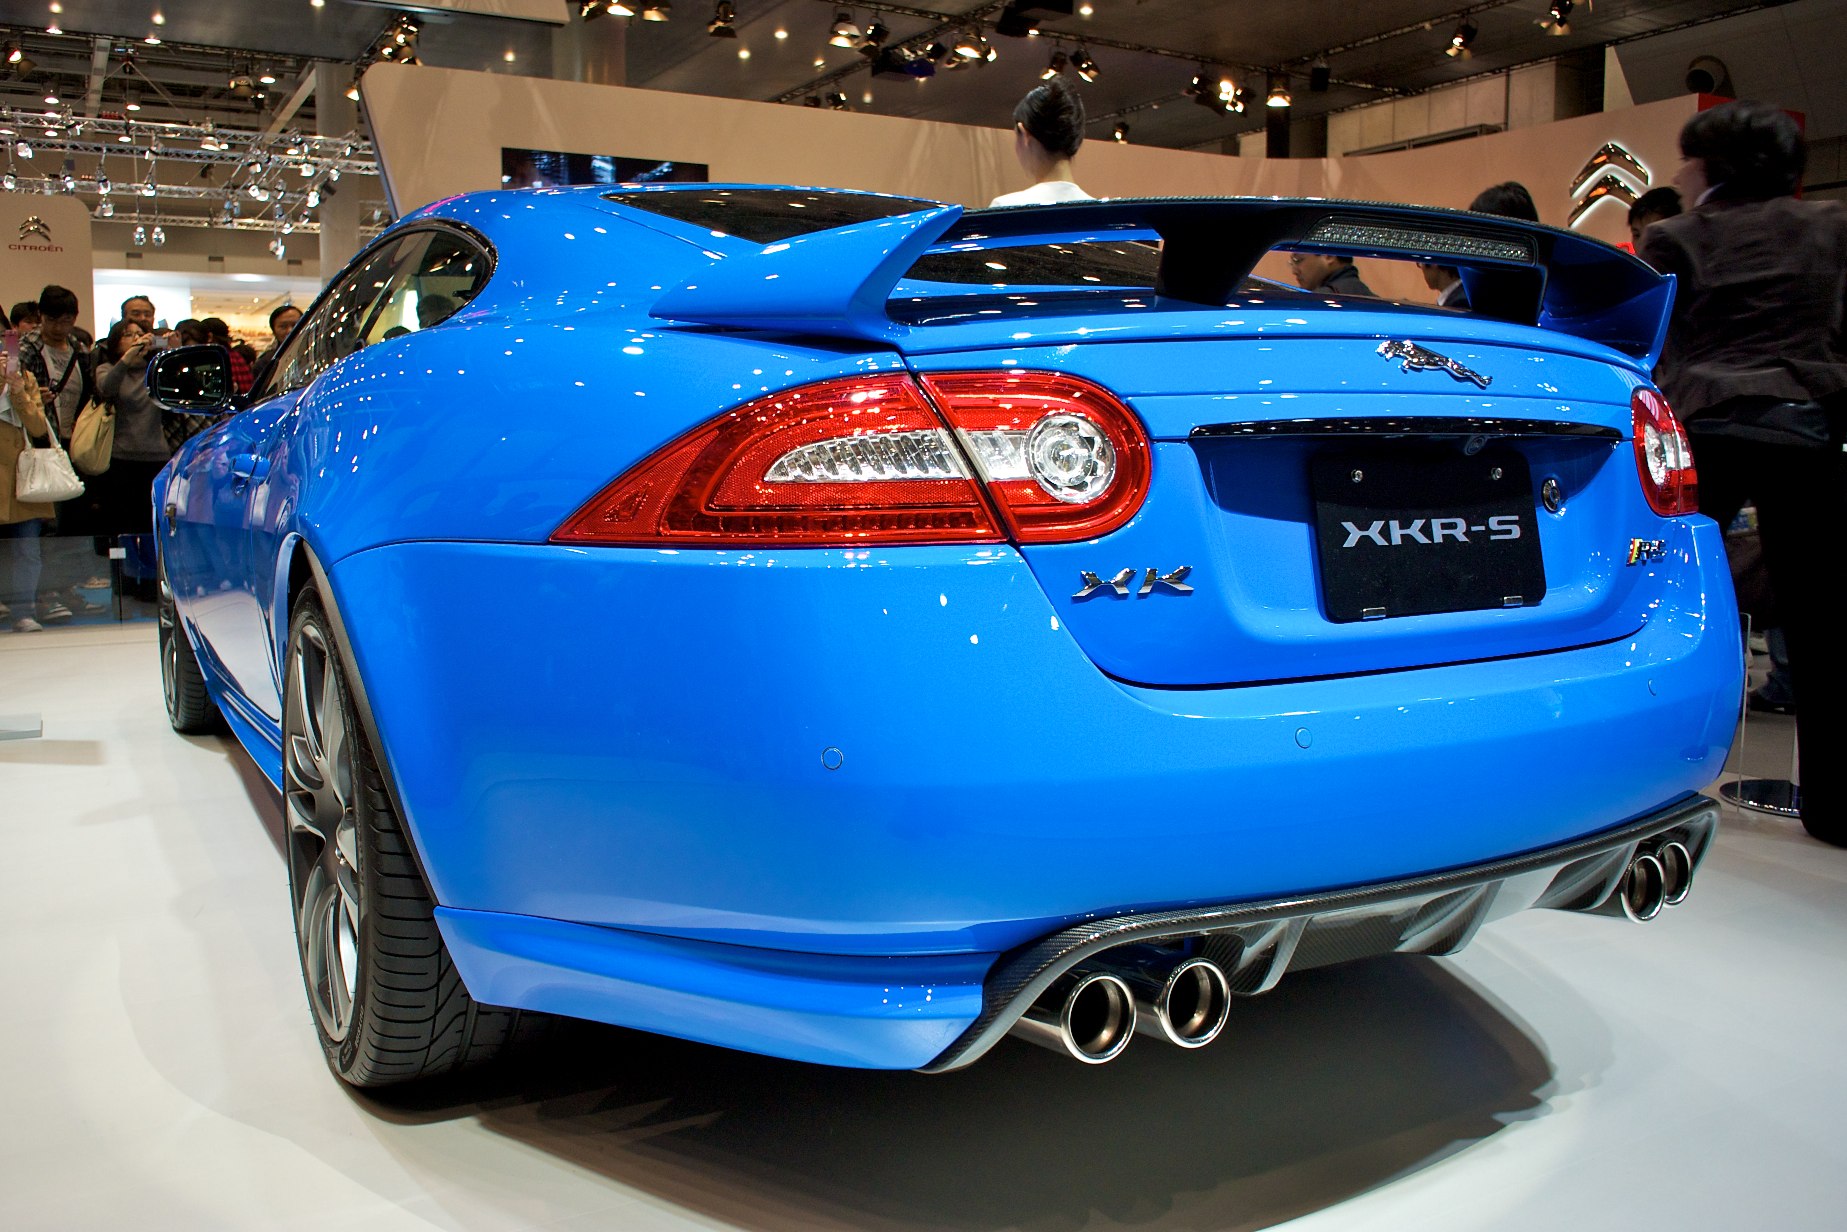 people are looking at the rear end of a blue sports car